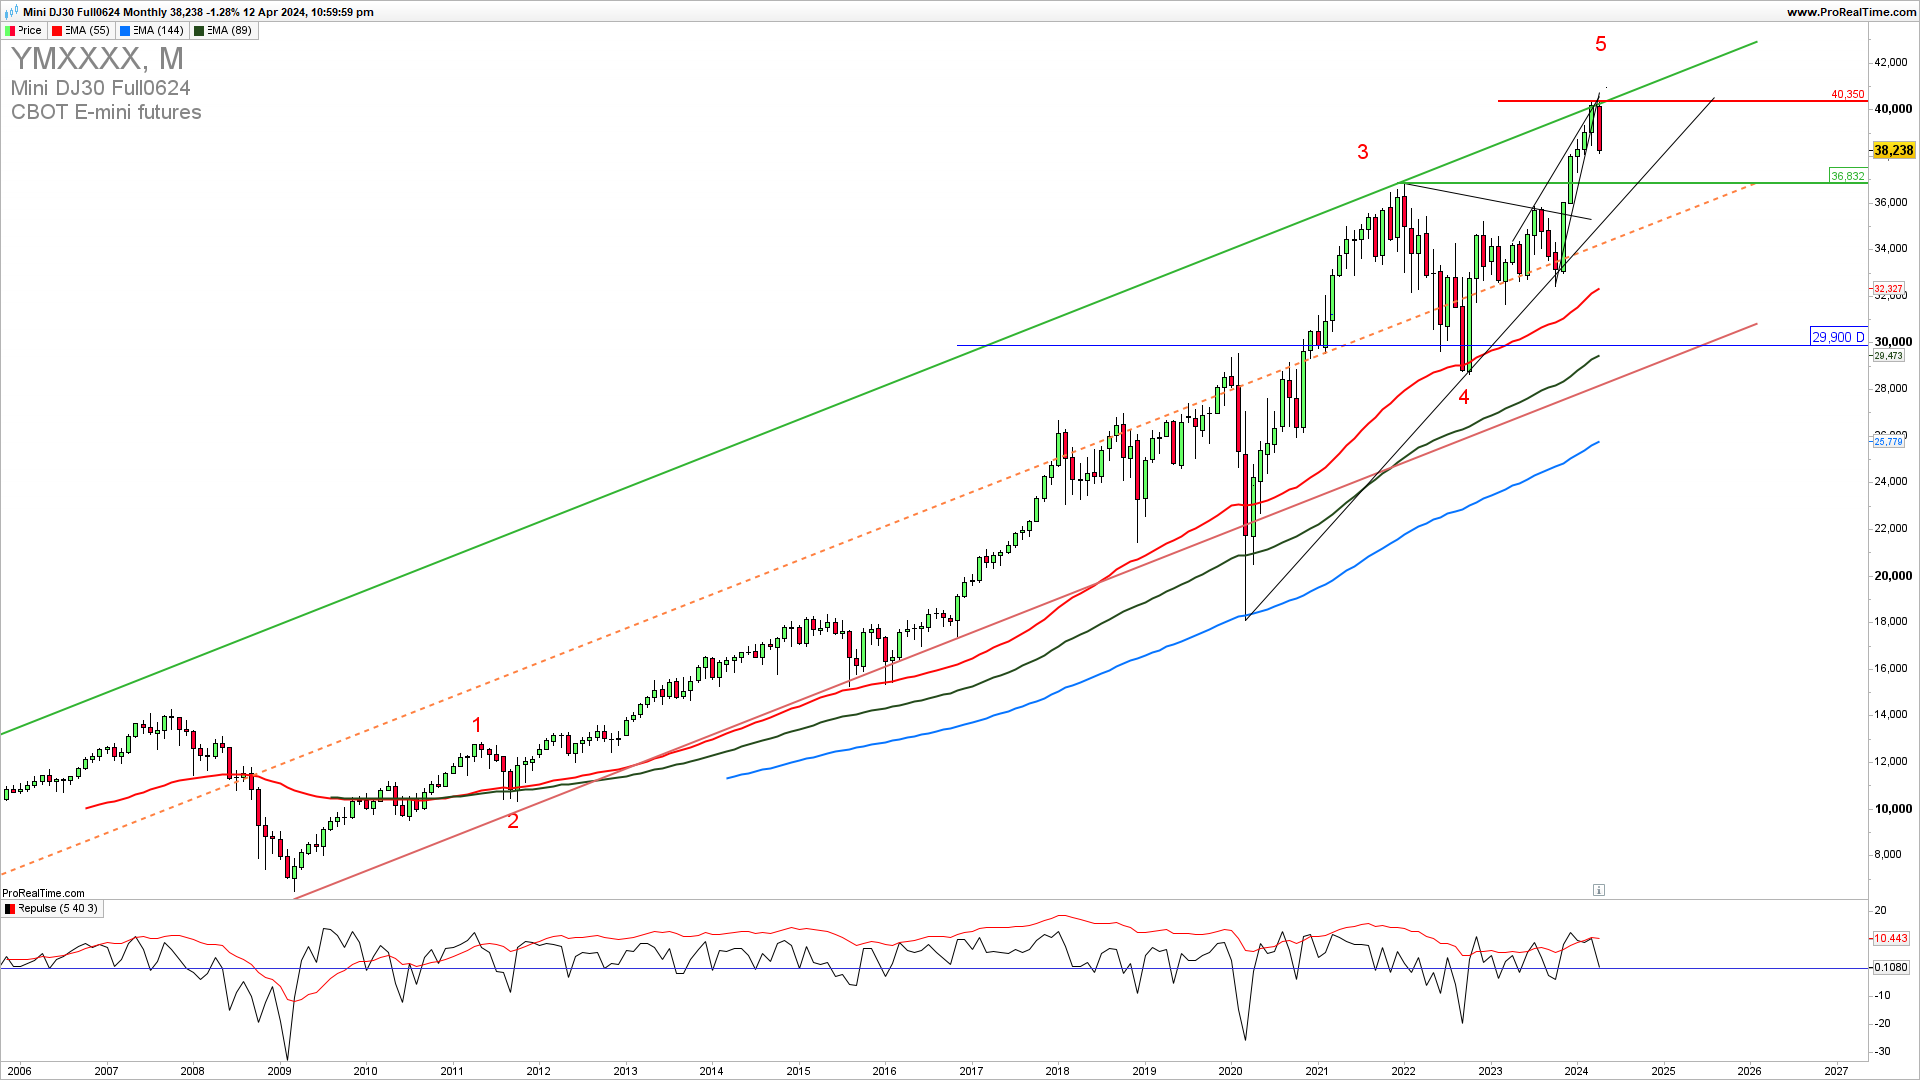 DJIA monthly chart